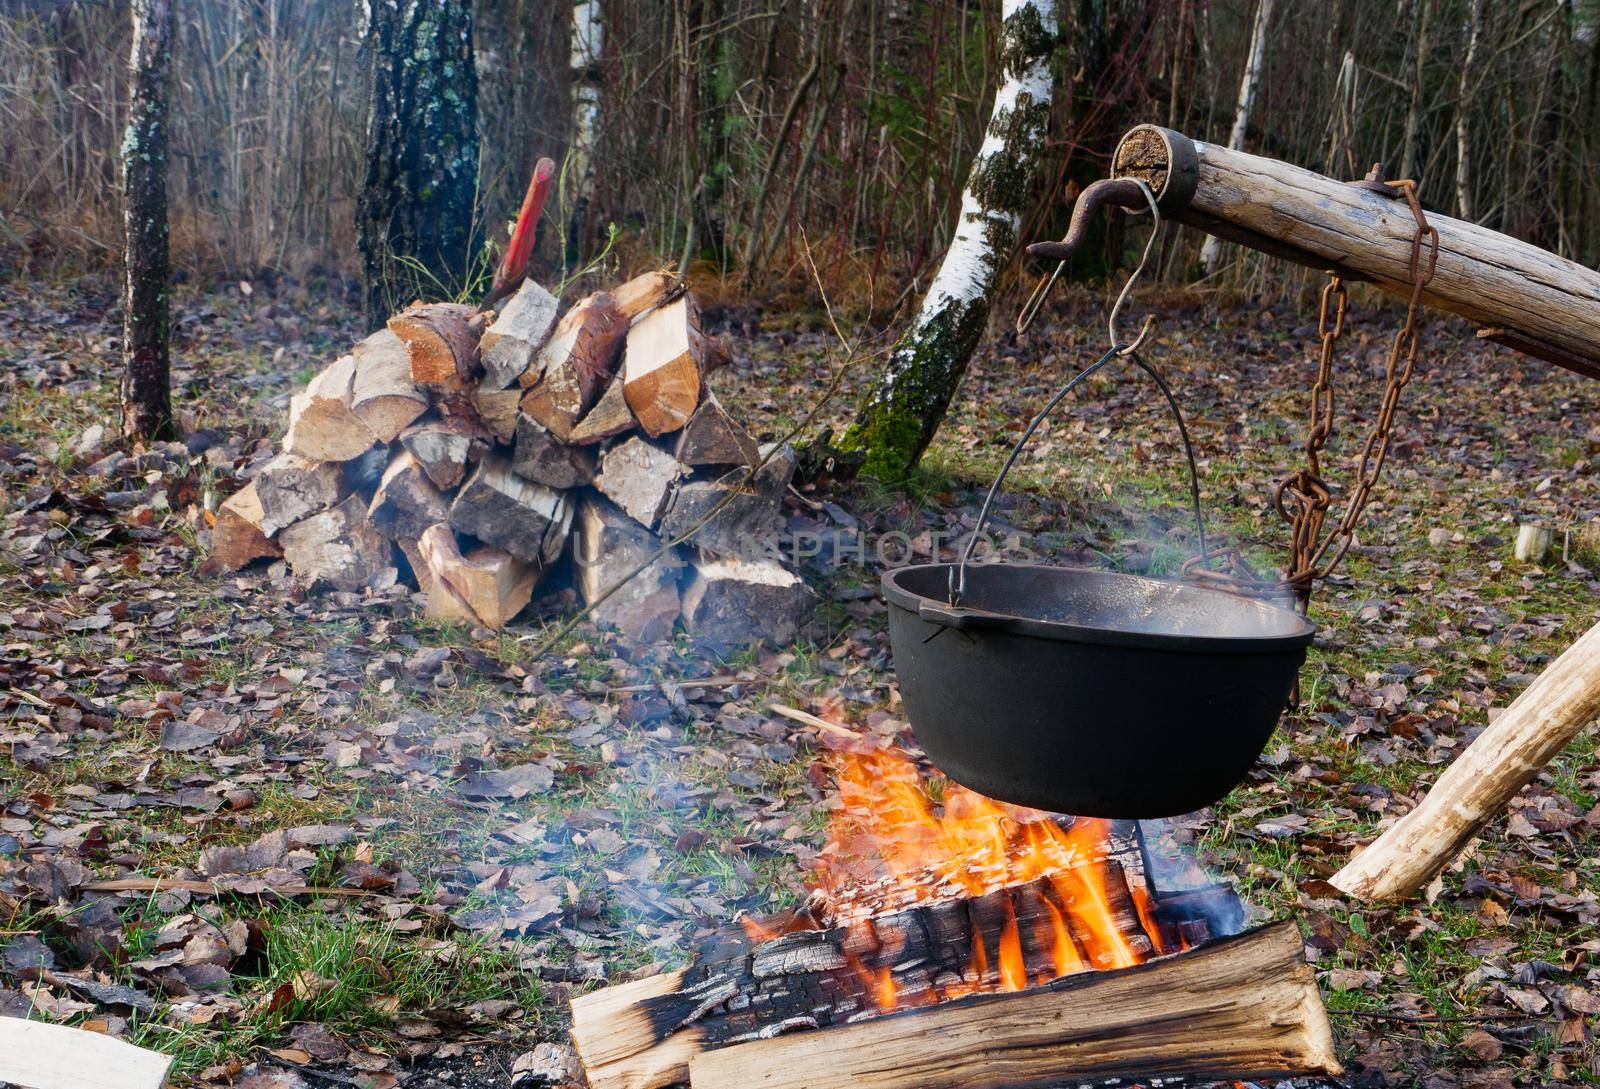 Cooking Fish Soup On The Fire. Touristic metal bowler pot. Cooking at the campsite, picnic, outdoor recreation.